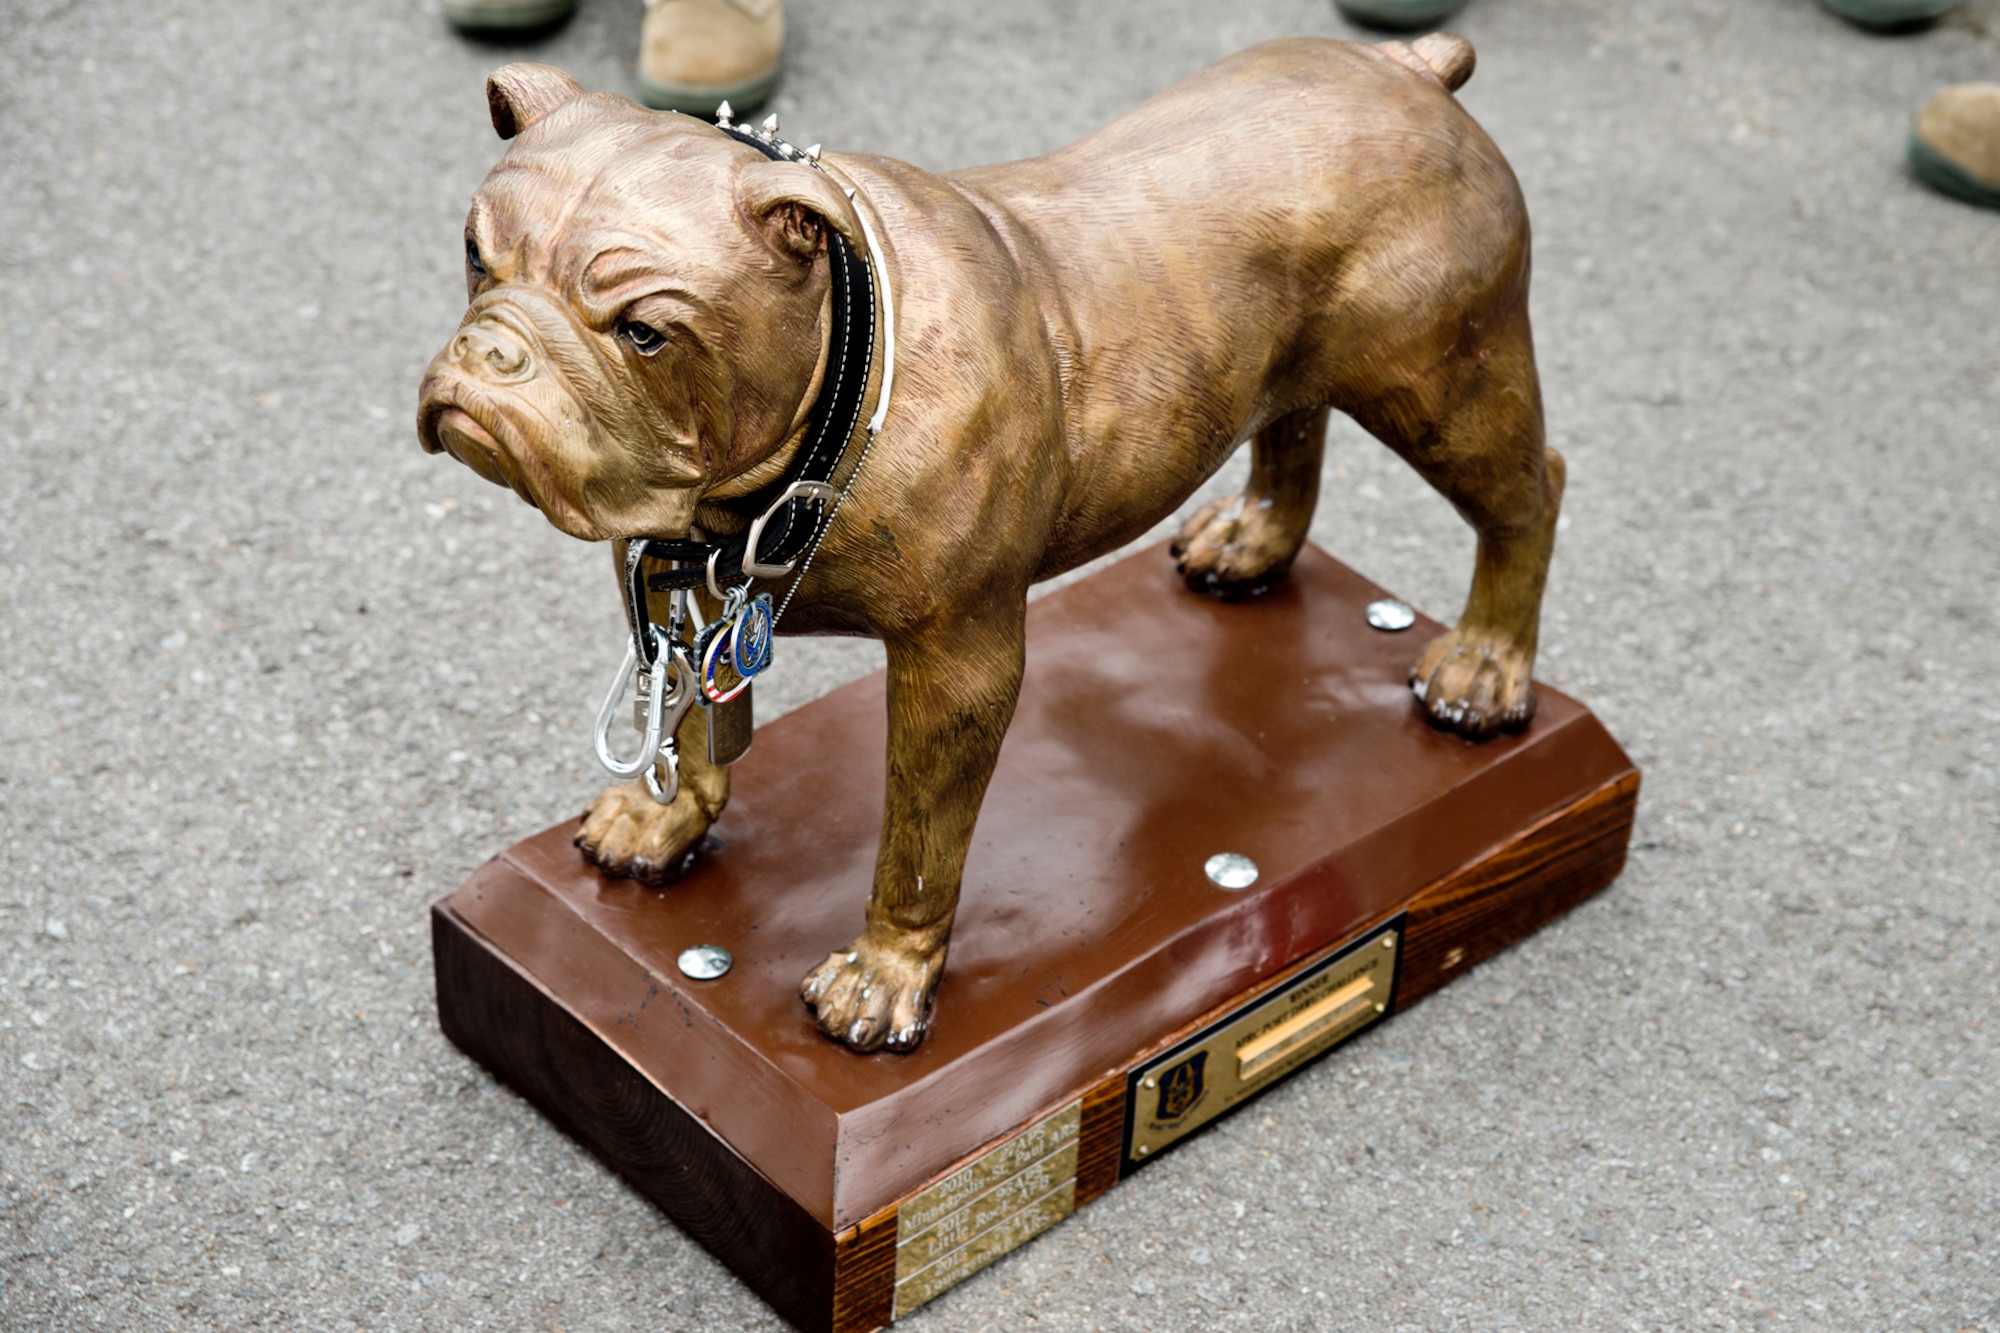 The "Top Dawg" trophy awaits transport to its new home at Little Rock Air Force Base, Ark., April 28, 2017. The trophy, a full-size bronze sculpture of a bulldog, was awarded to the 96th Aerial Port Squadron during the 2017 Air Force Reserve Command Port Dawg Challenge at Dobbins Air Reserve Base, Ga., April 25-27. The 96th APS is the first unit to win the overall competition twice since it began in 2010. (U.S. Air Force photo by Master Sgt. Jeff Walston/Released)